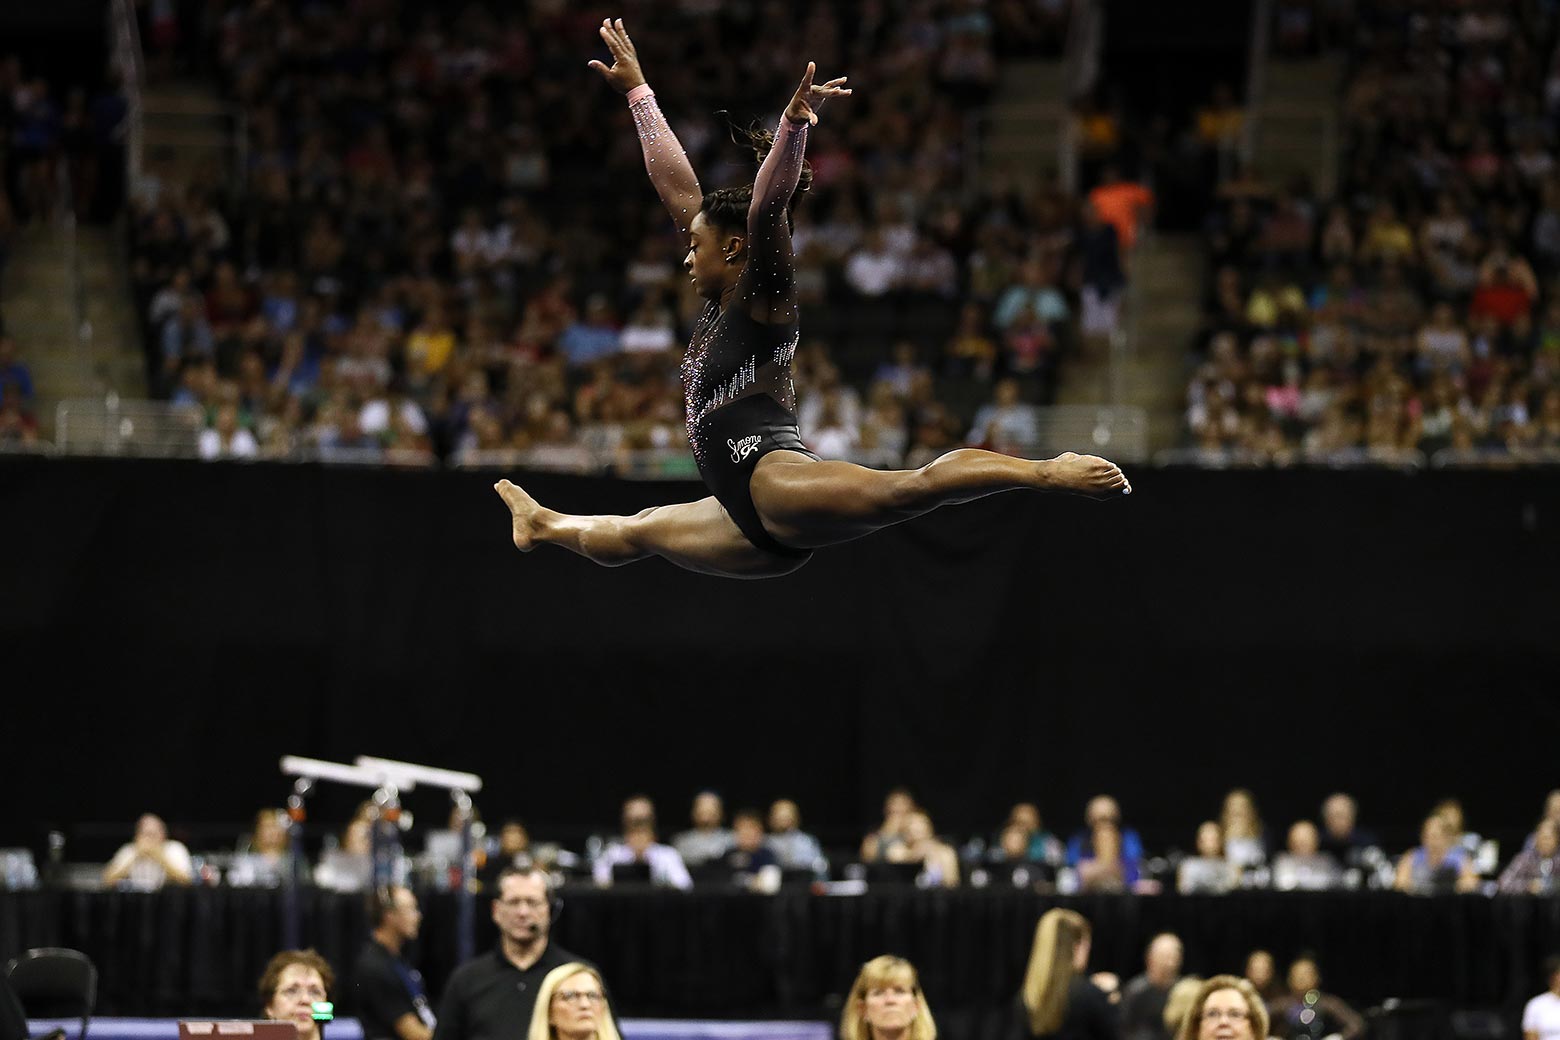 Simone Biles is seen mid-leap during her floor exercise on Sunday in Kansas City.